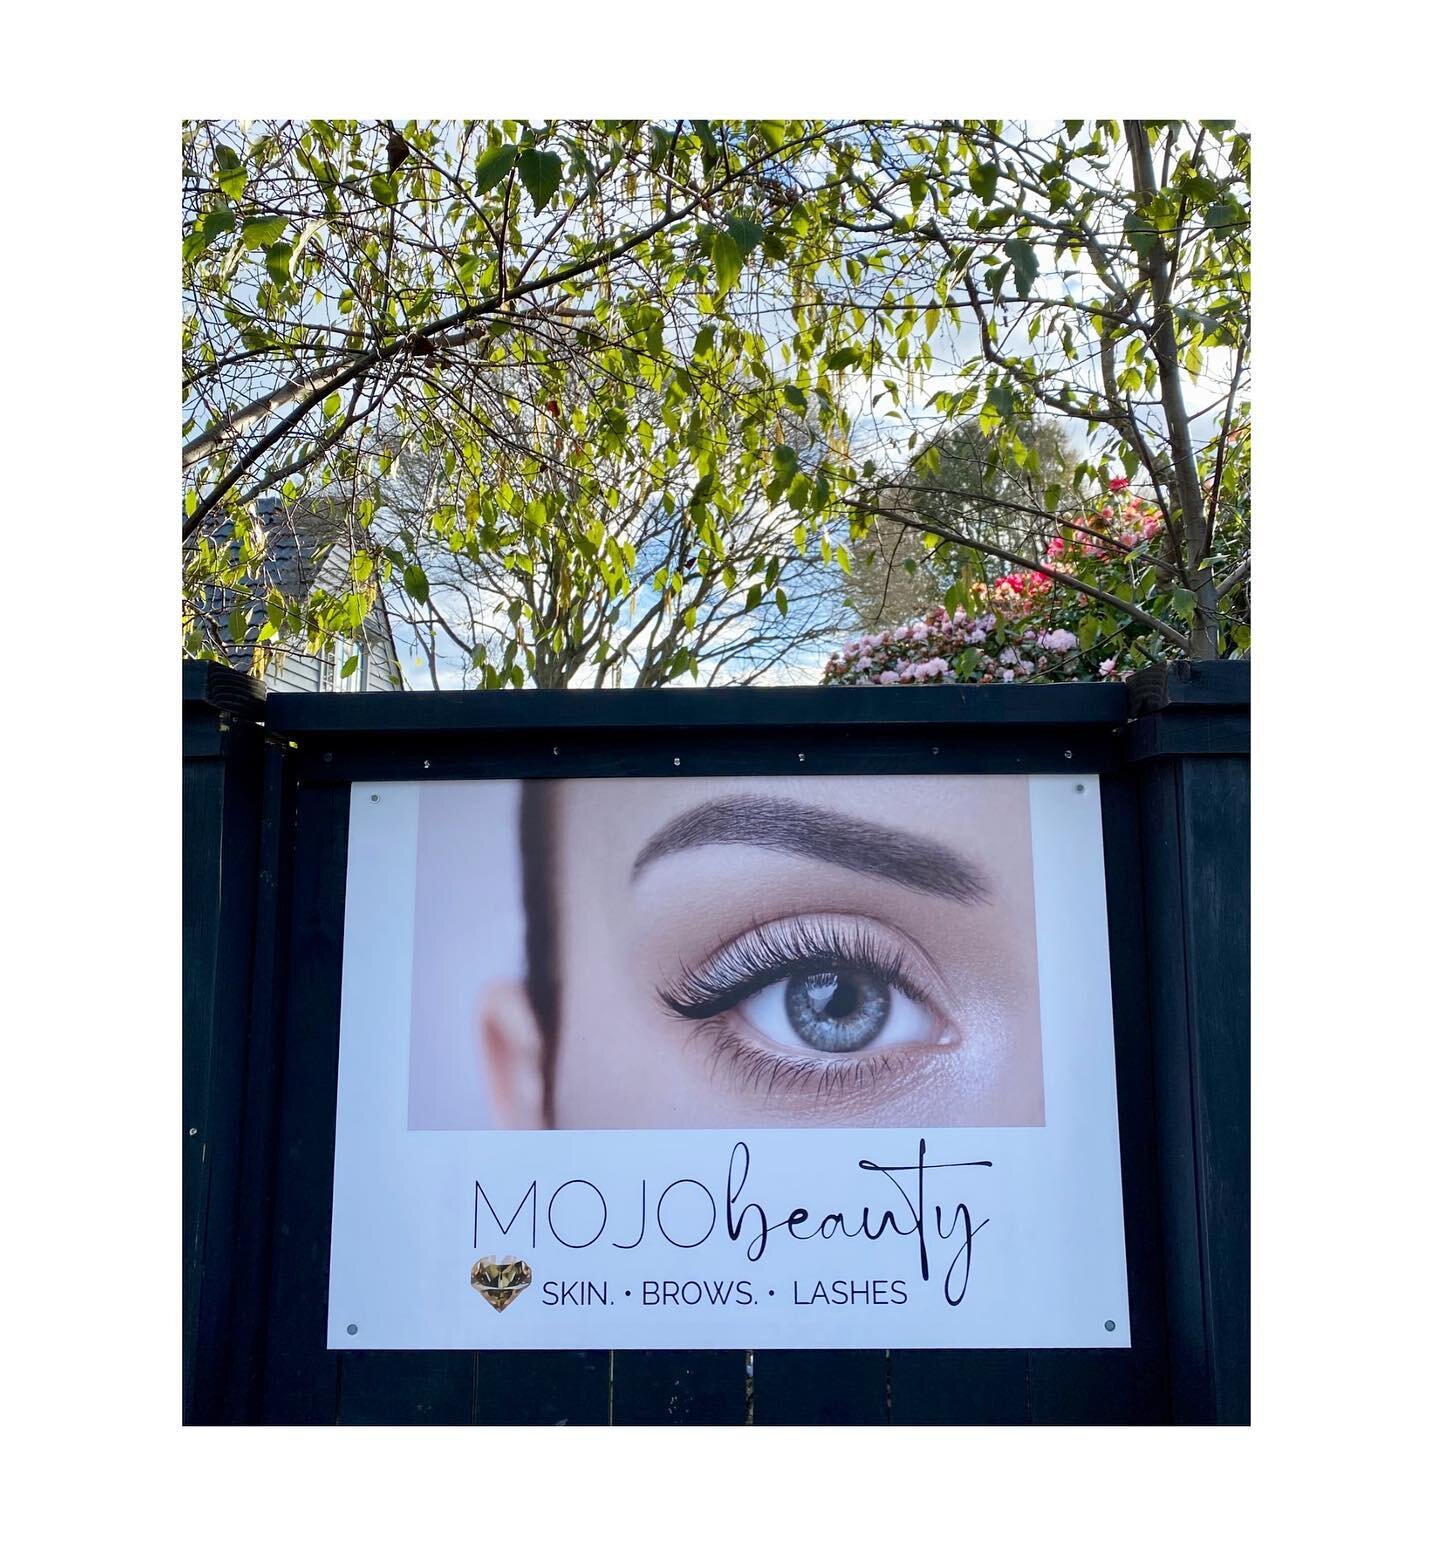 Spring 🌼 is so close! Next week in fact! 🌸🌺🌻🌞
This winter has been really difficult for me, it&rsquo;s steals my joy. The lack of light, the cold, the gloomy rain.. but today the dial has been turned up, did you feel it? 💕 
#mojobeautynz